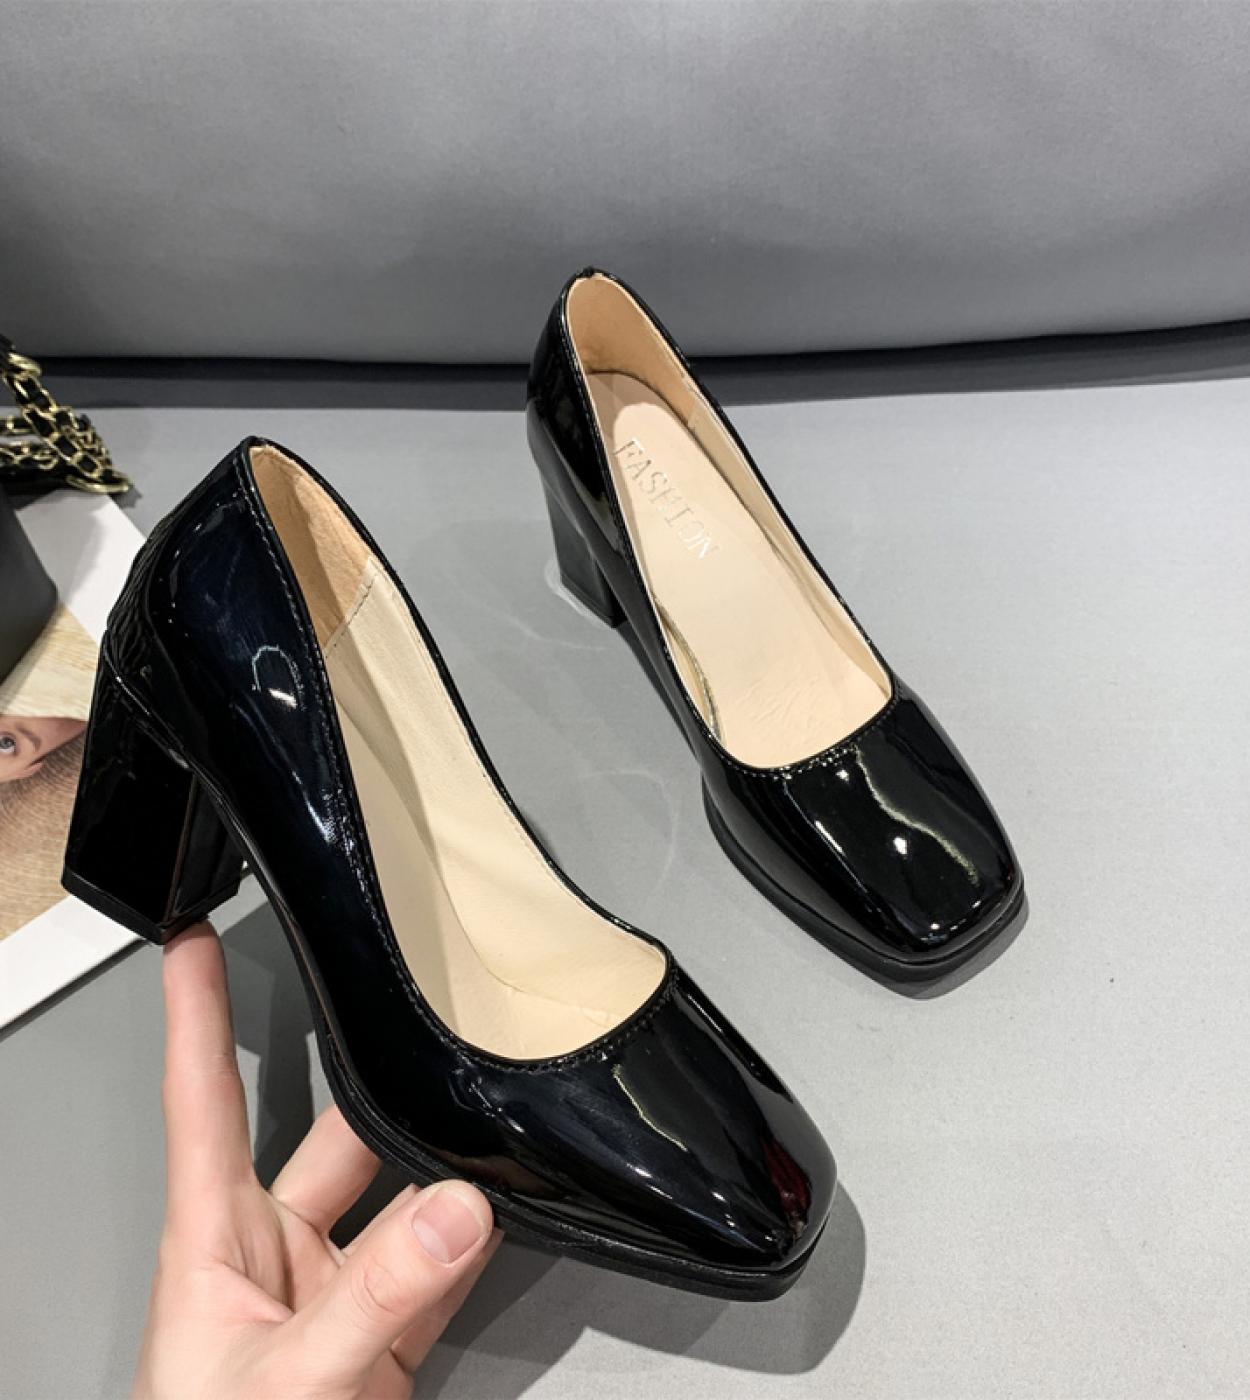 2022 Women Shoes Square Toe Pumps Patent Leather Platform Heels Dress High Heels Boat Shoes Shadow Wedding Shoes Zapatos